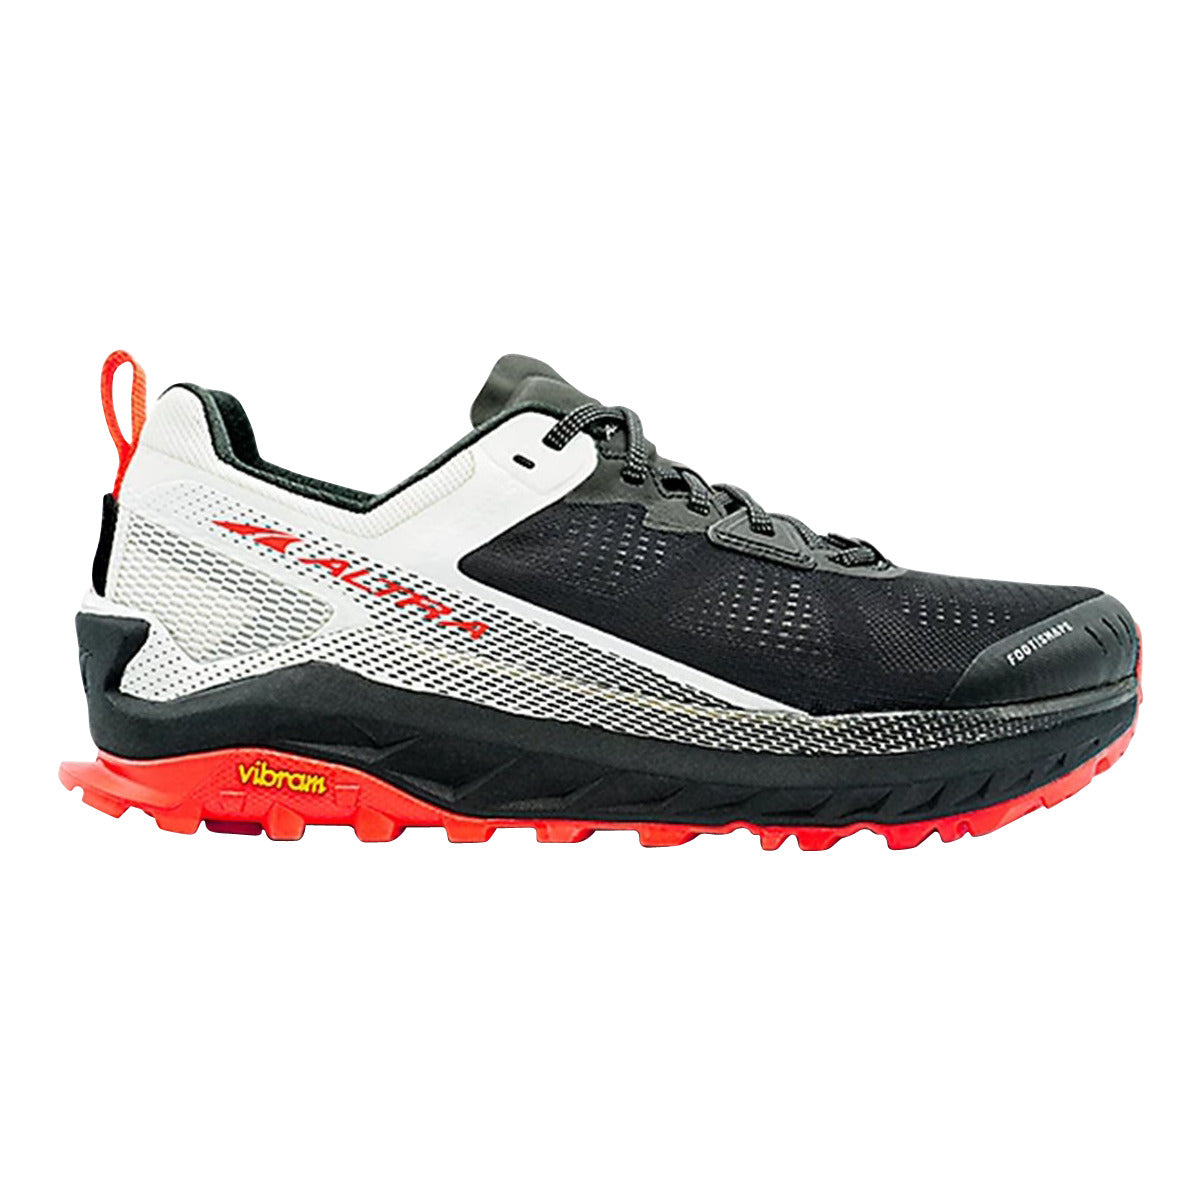 Altra Olympus 4 in Black & White by GOHUNT | Altra - GOHUNT Shop